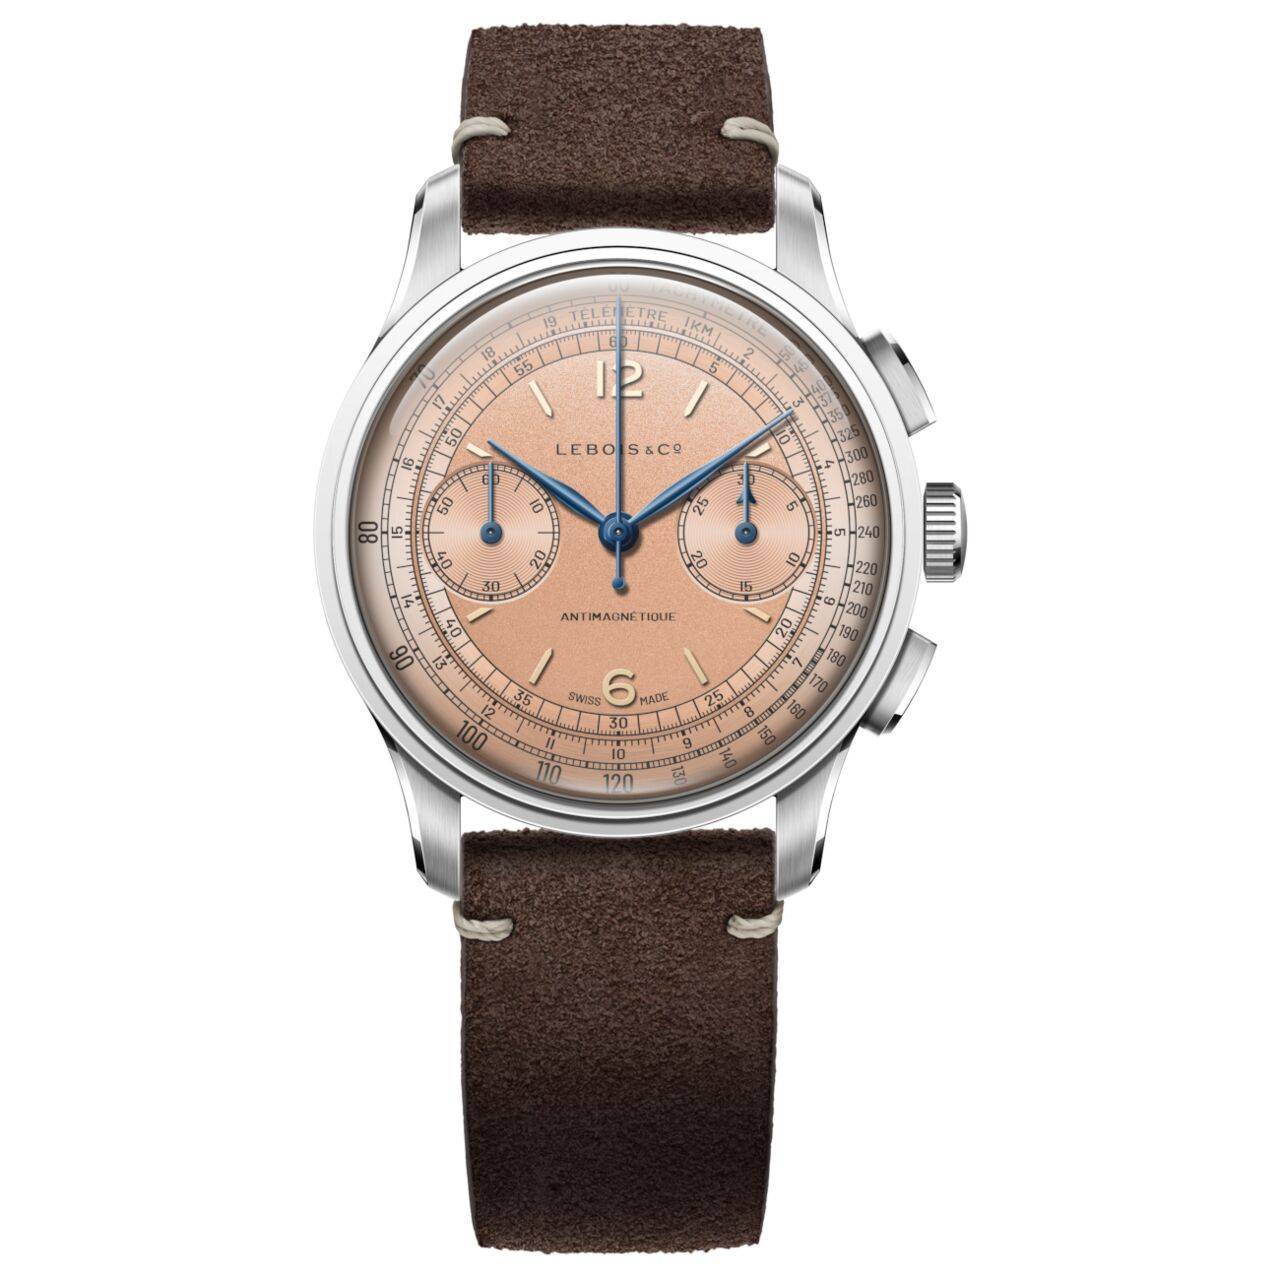 Heritage-Chronograph-324478-Hickory-Brown-Suede.jpg